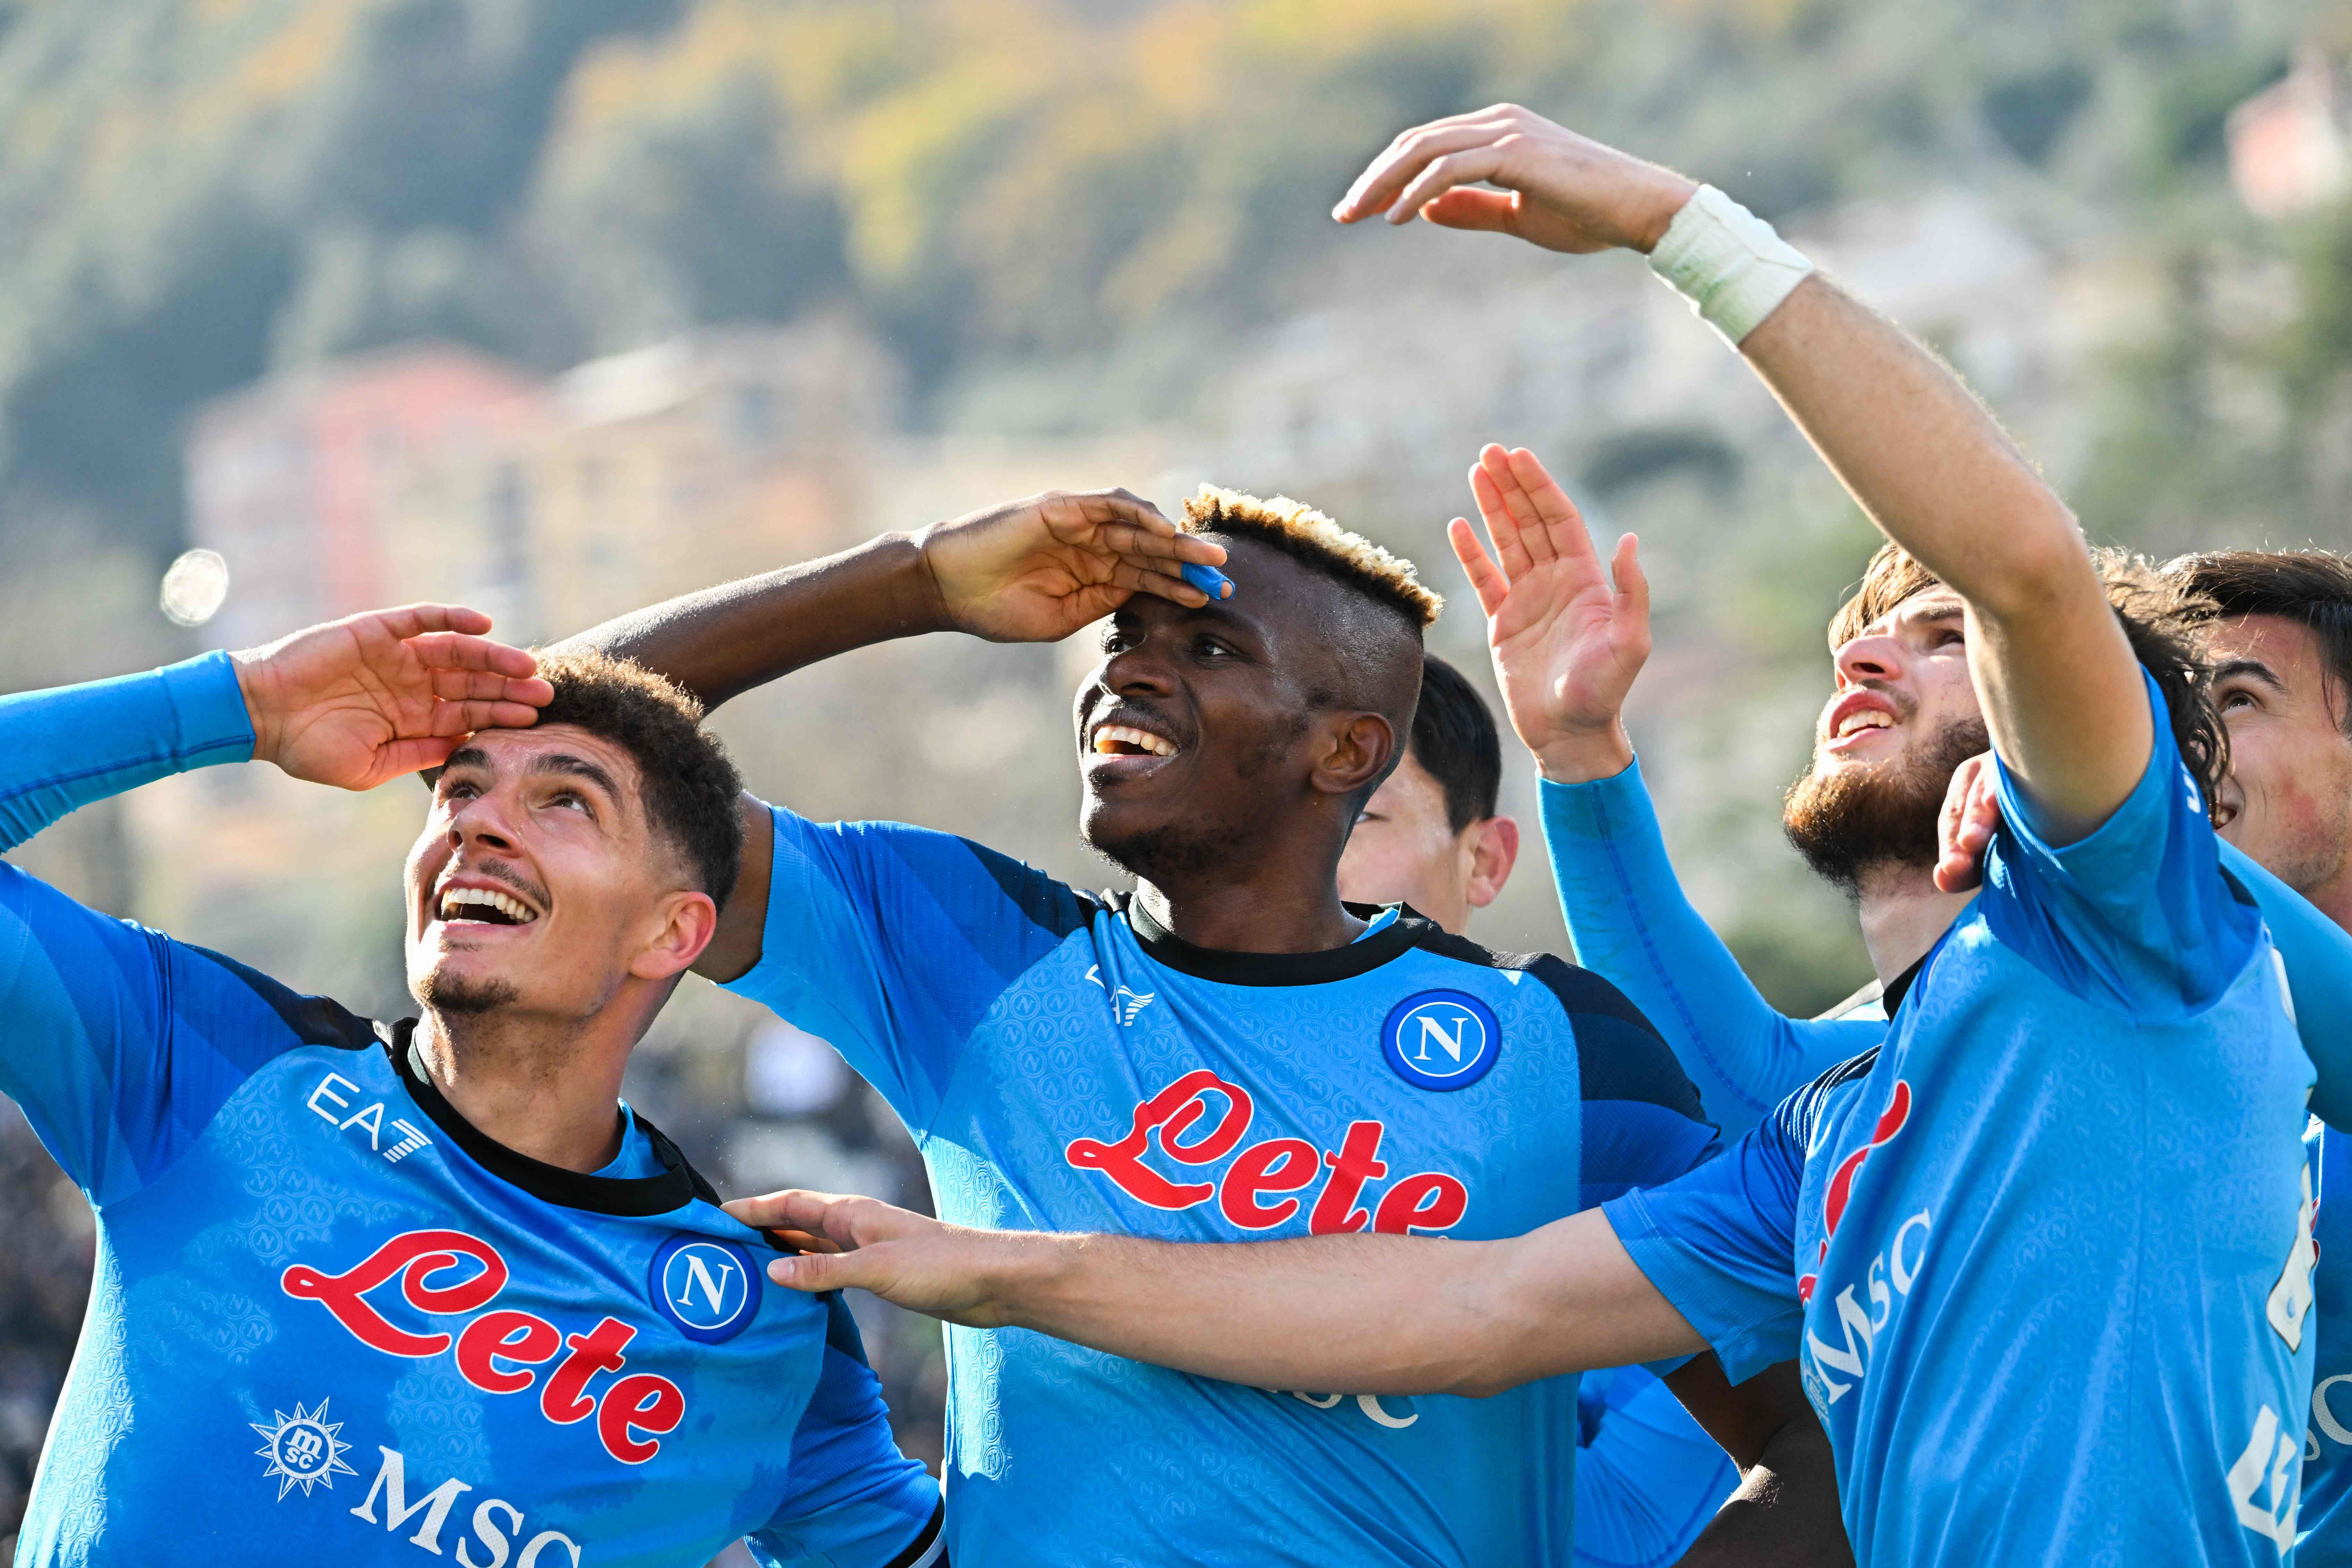 Napoli's title march brings glory to Southern Italy